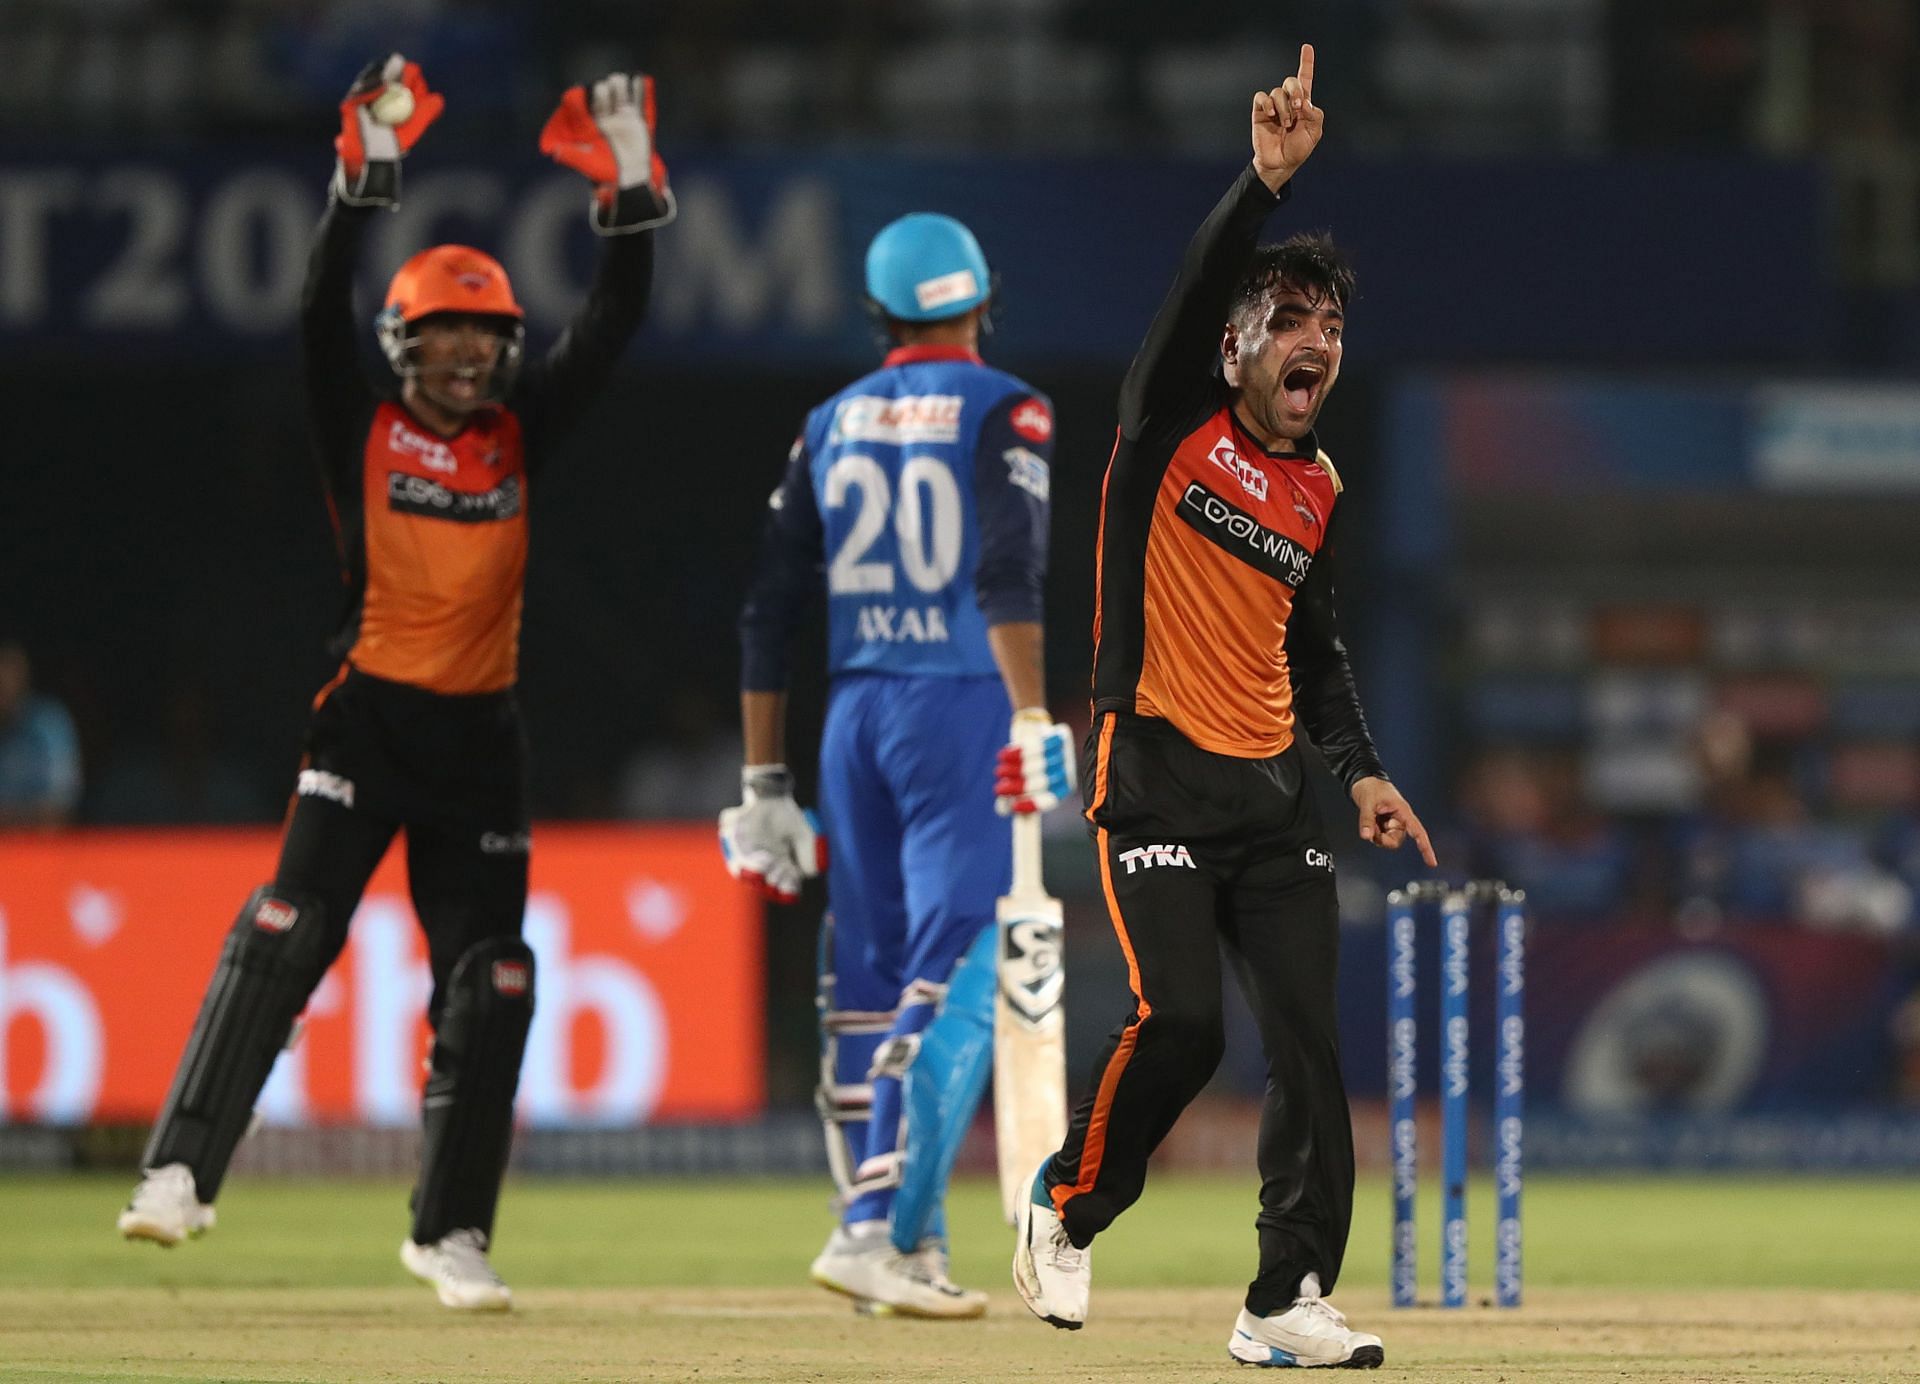 Rashid Khan has not been retained by Sunrisers Hyderabad ahead of IPL Auction 2022